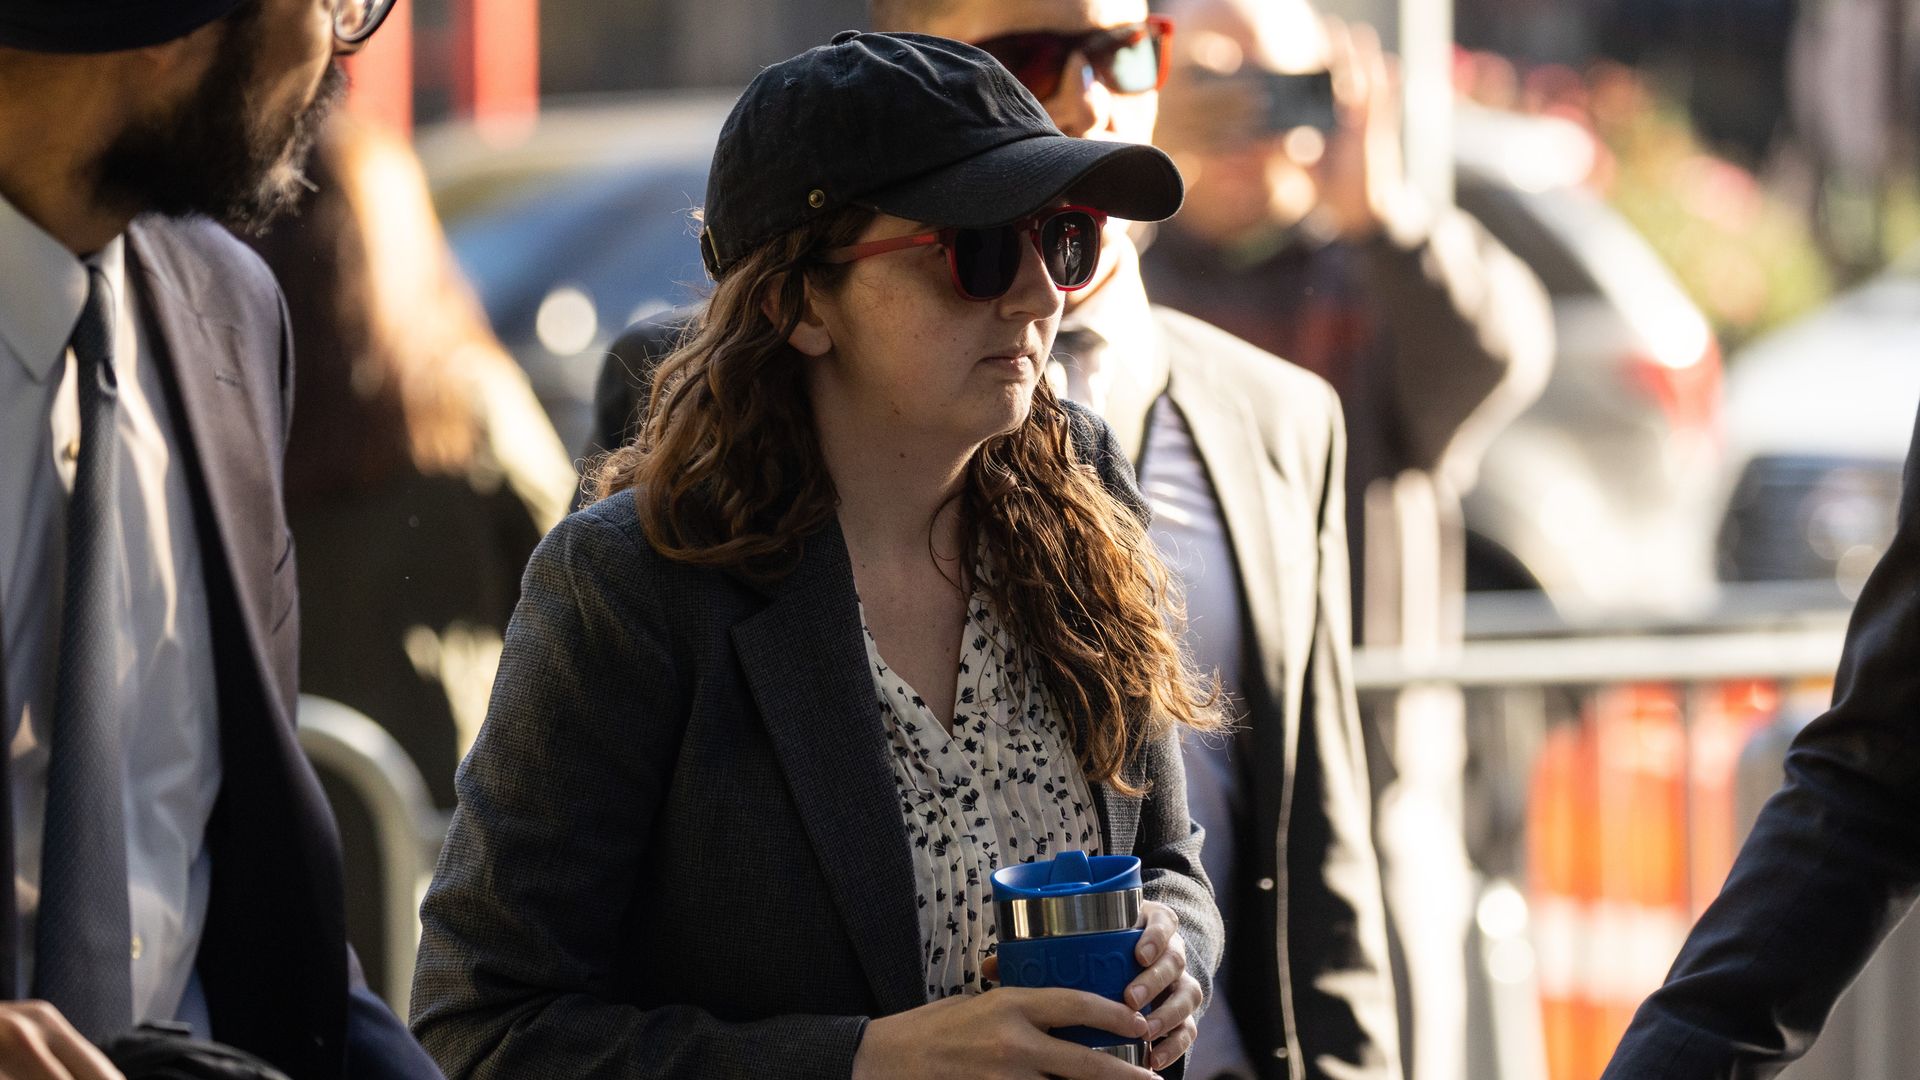 A woman with sunglasses and a had pulled tight on her head holds a blue mug, with security around her.